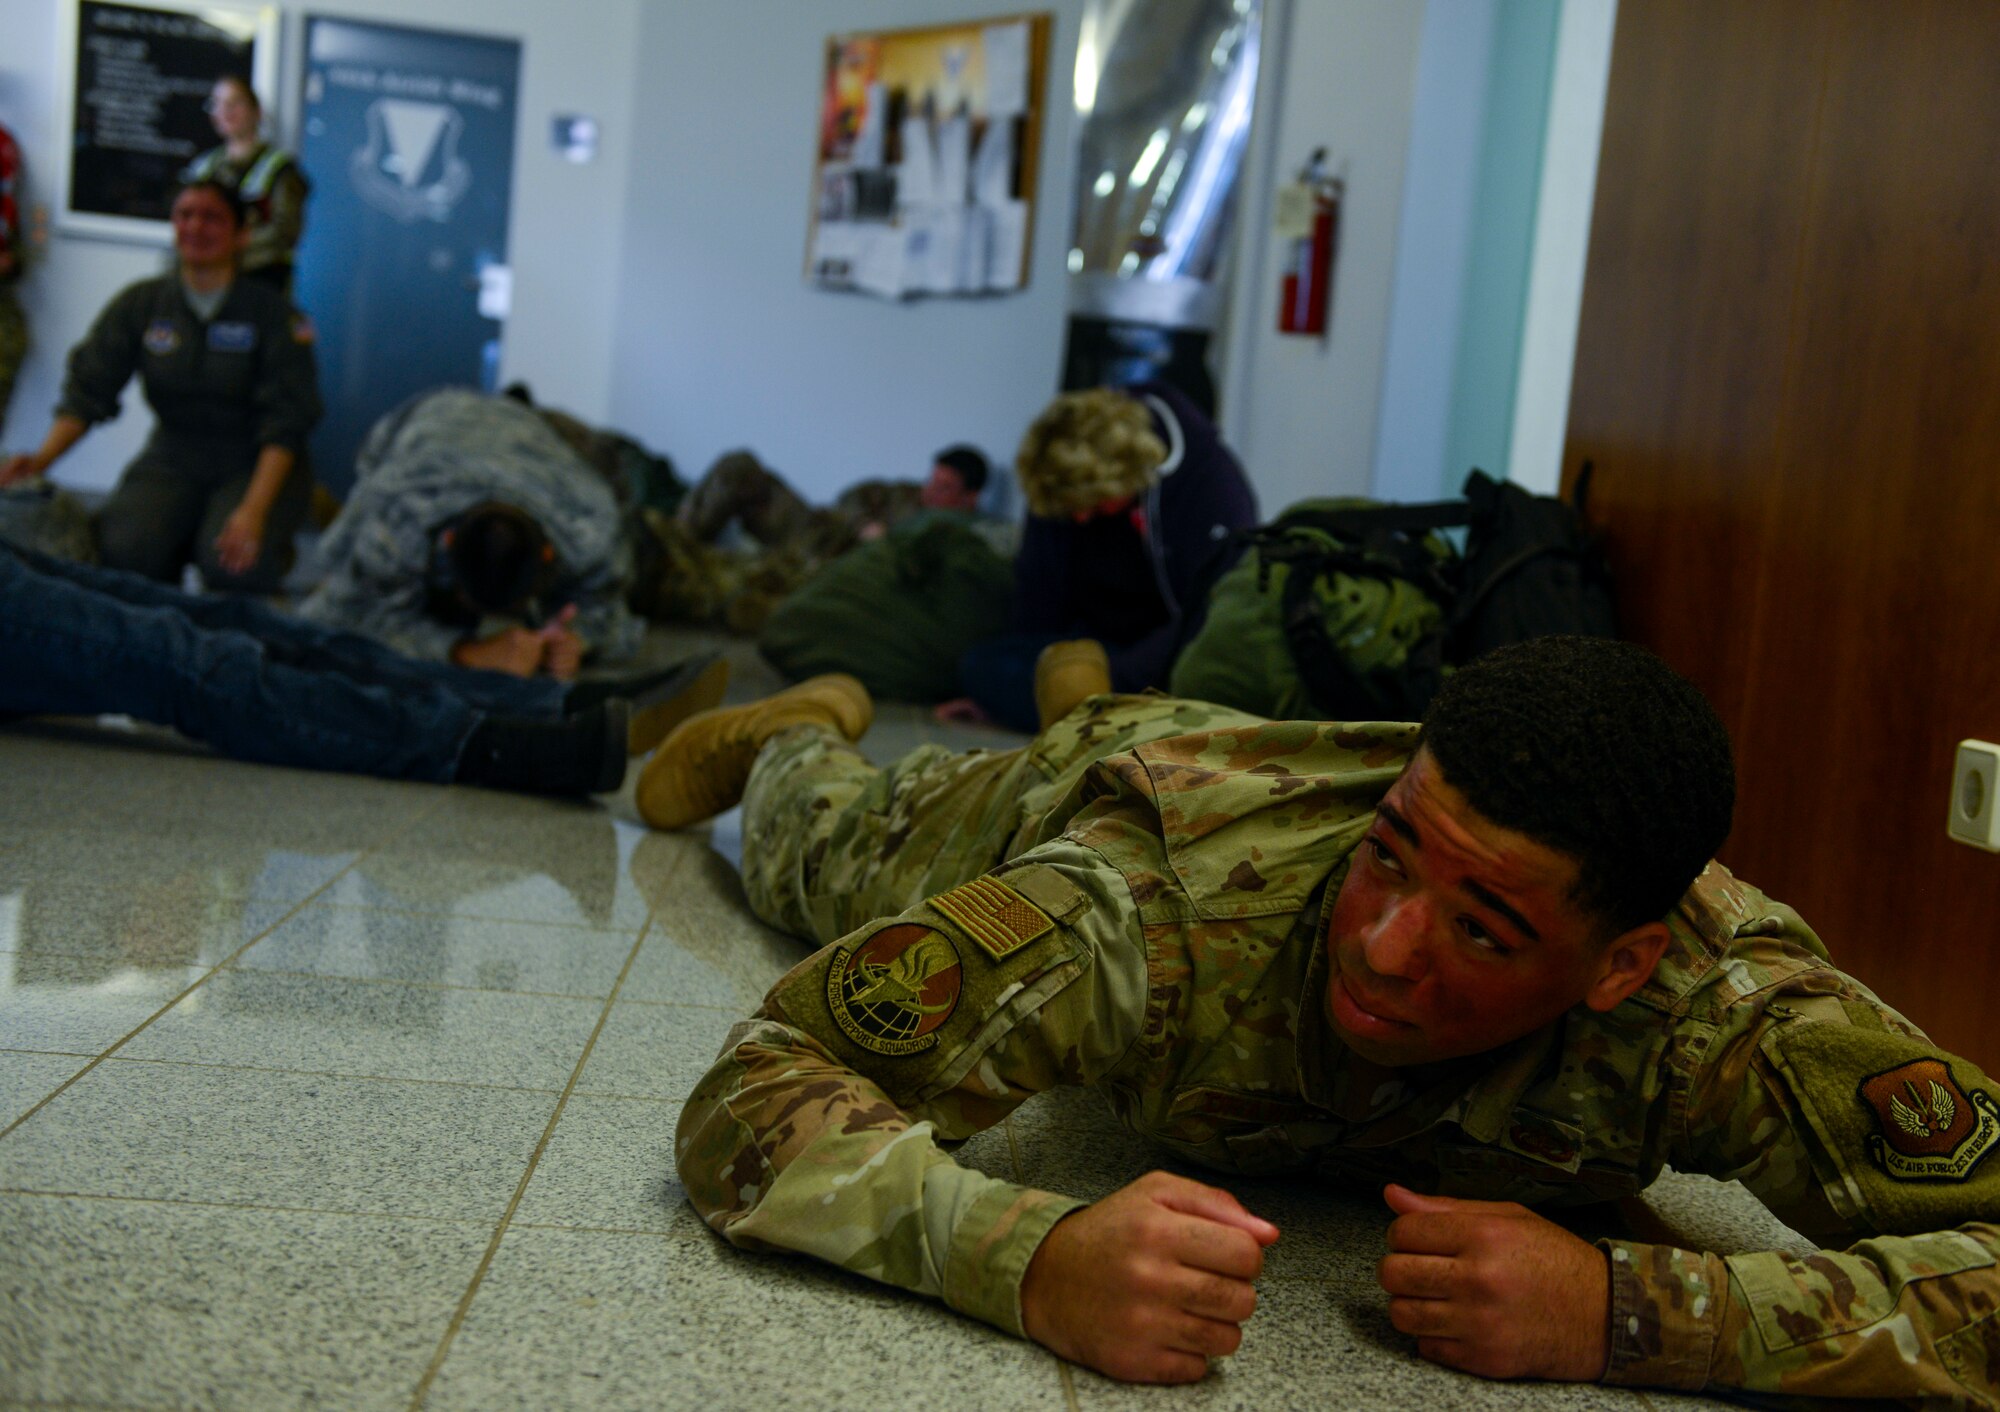 U.S. Airmen and German civilians participating in a simulated mass casualty event for Operation Varsity 19-03 act out their injuries at Ramstein Air Base, Germany, Sept. 25, 2019. The actors added another level of realism to the event that first responders could not experience during an exercise without them. (U.S. Air Force photo by Tech. Sgt. Timothy Moore)